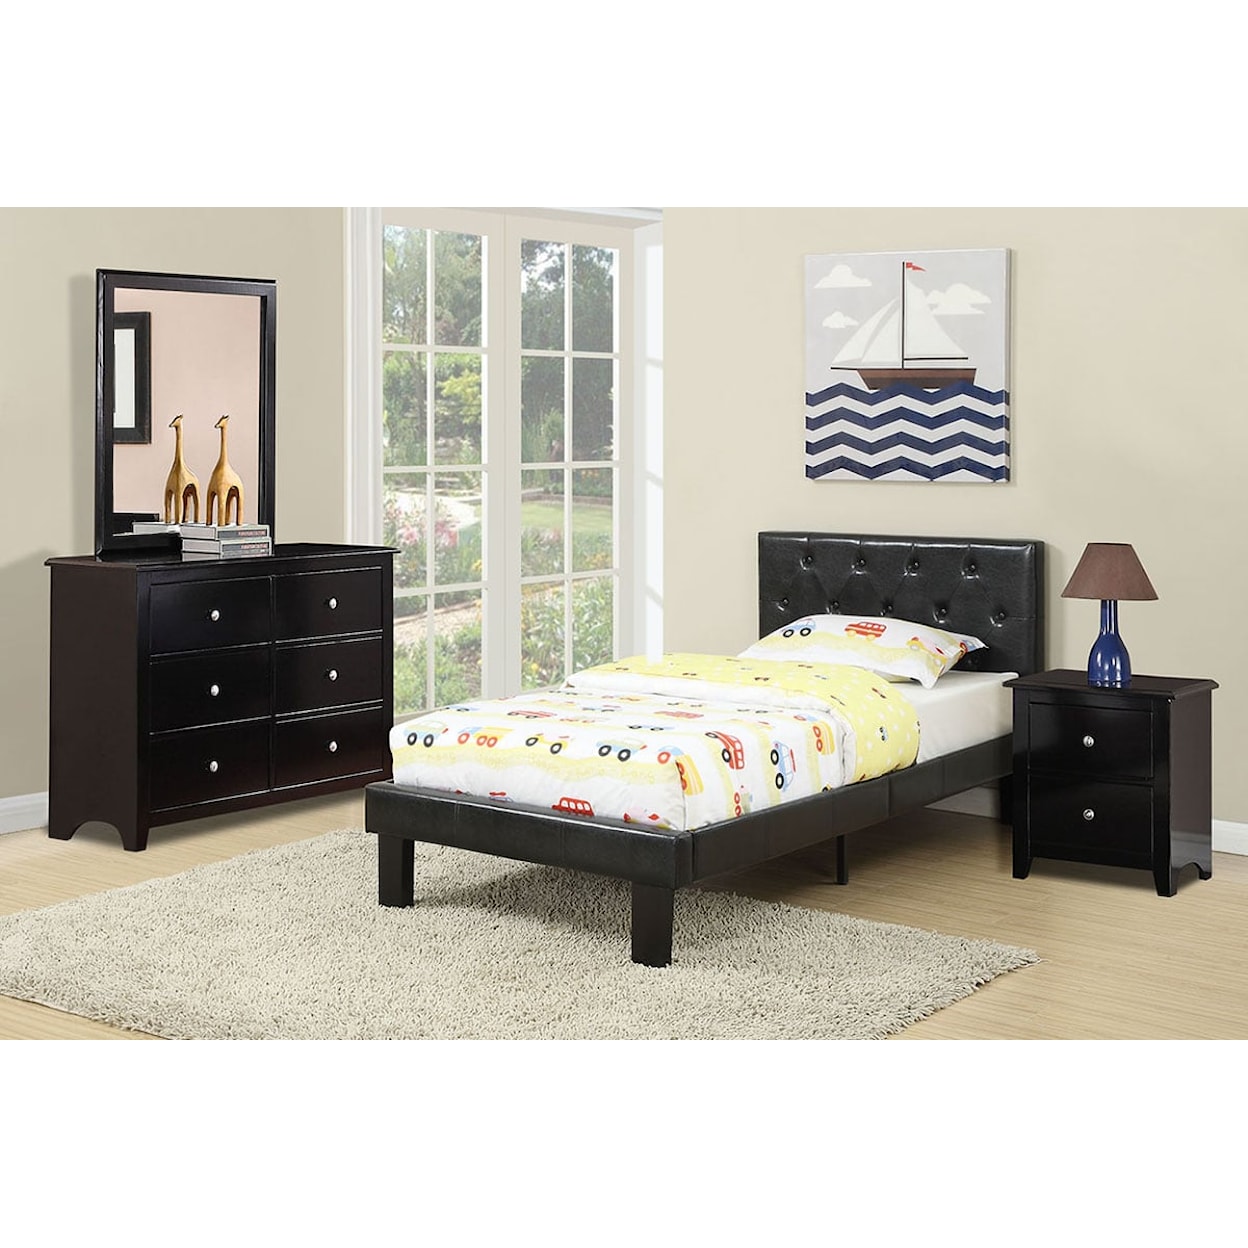 Poundex Twin/Full Beds DAILY BLACK TWIN BED W/ SLATS |